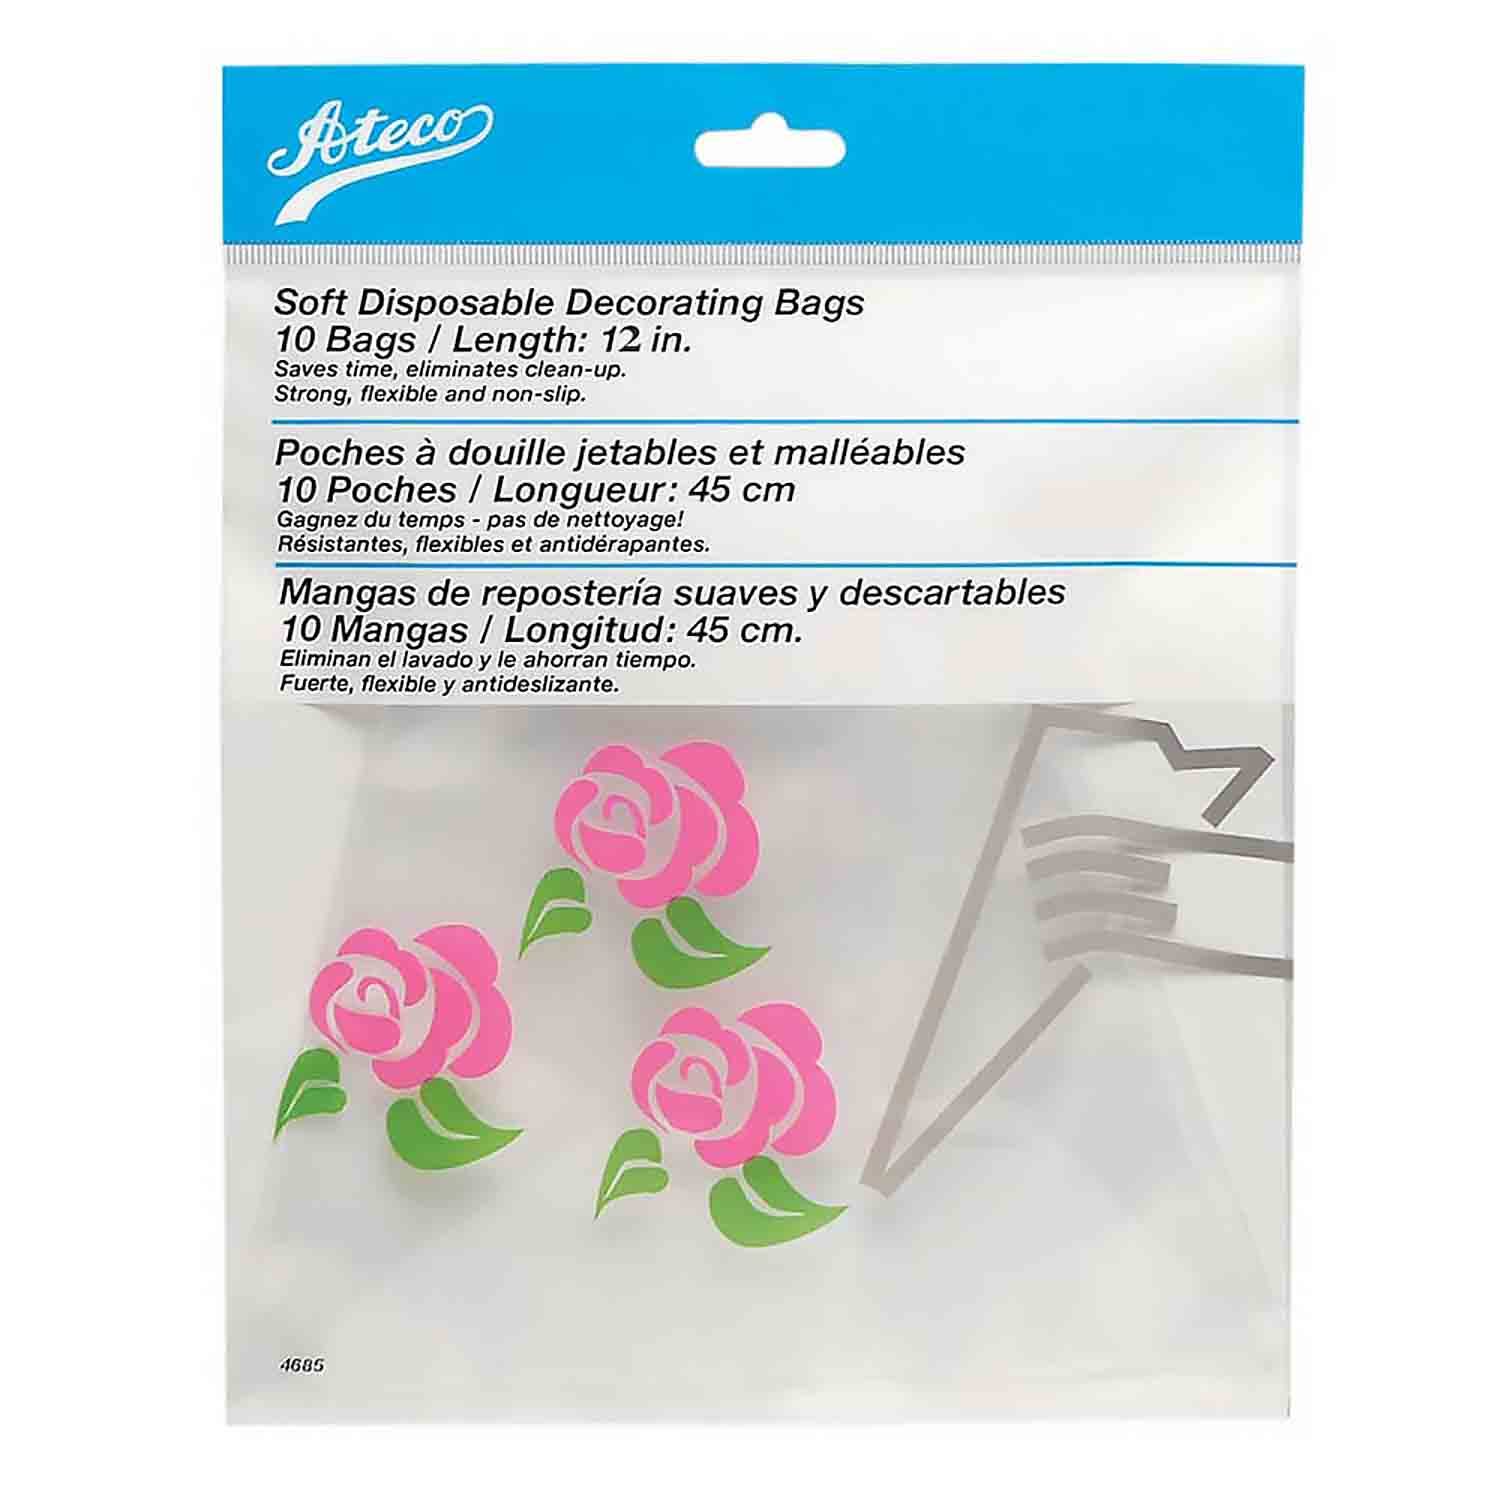 Ateco 10-Pack Soft Disposable 12-Inch Decorating Bags